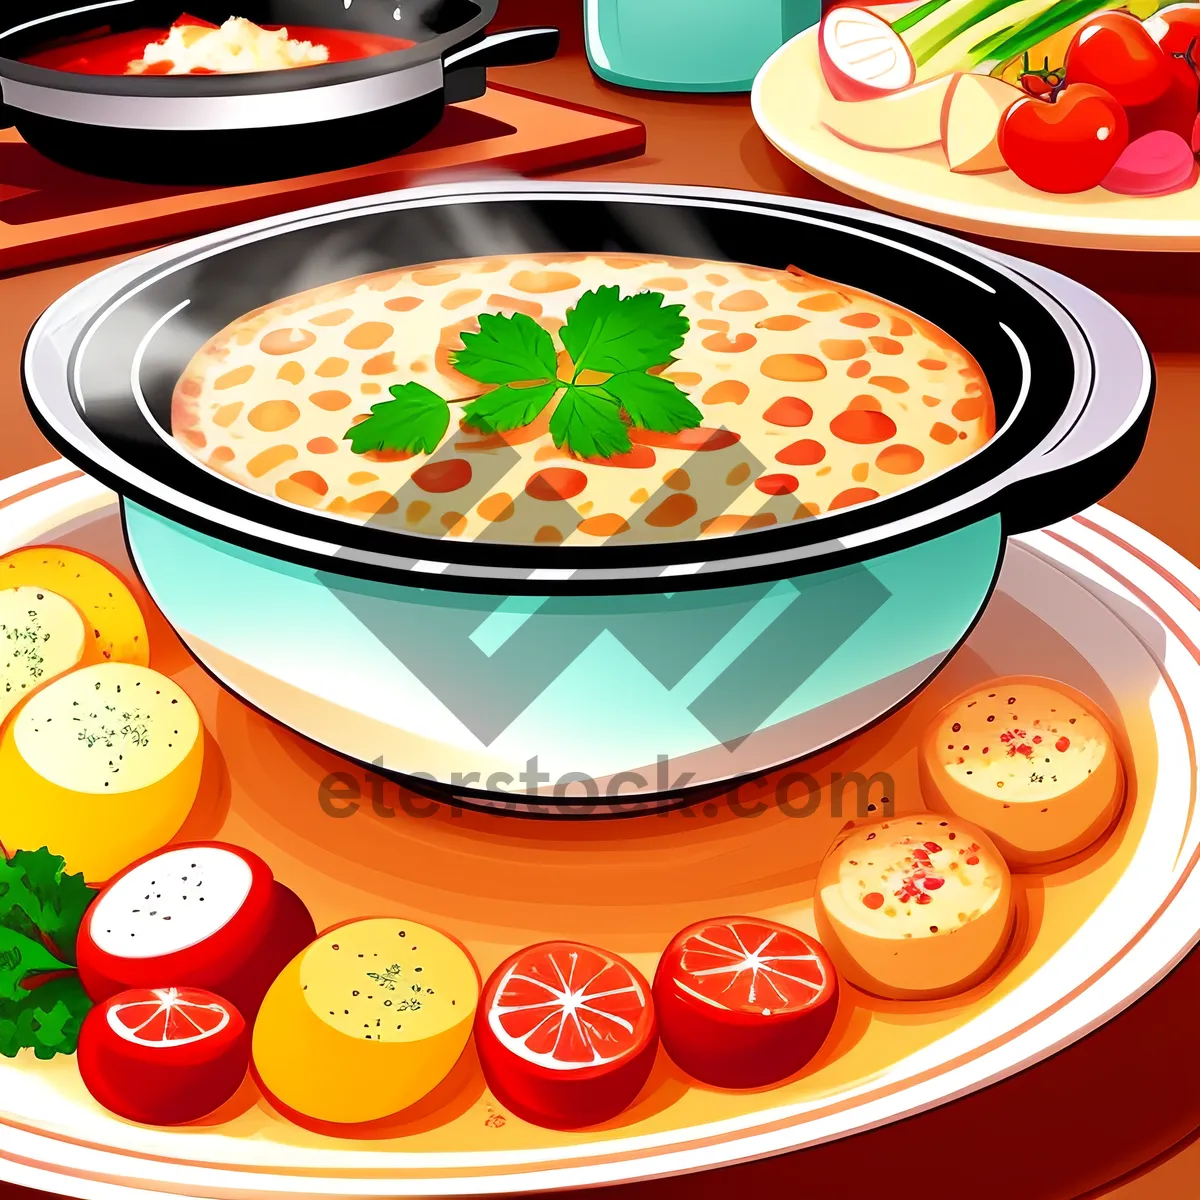 Picture of Delicious Vegetable Soup in Bowl